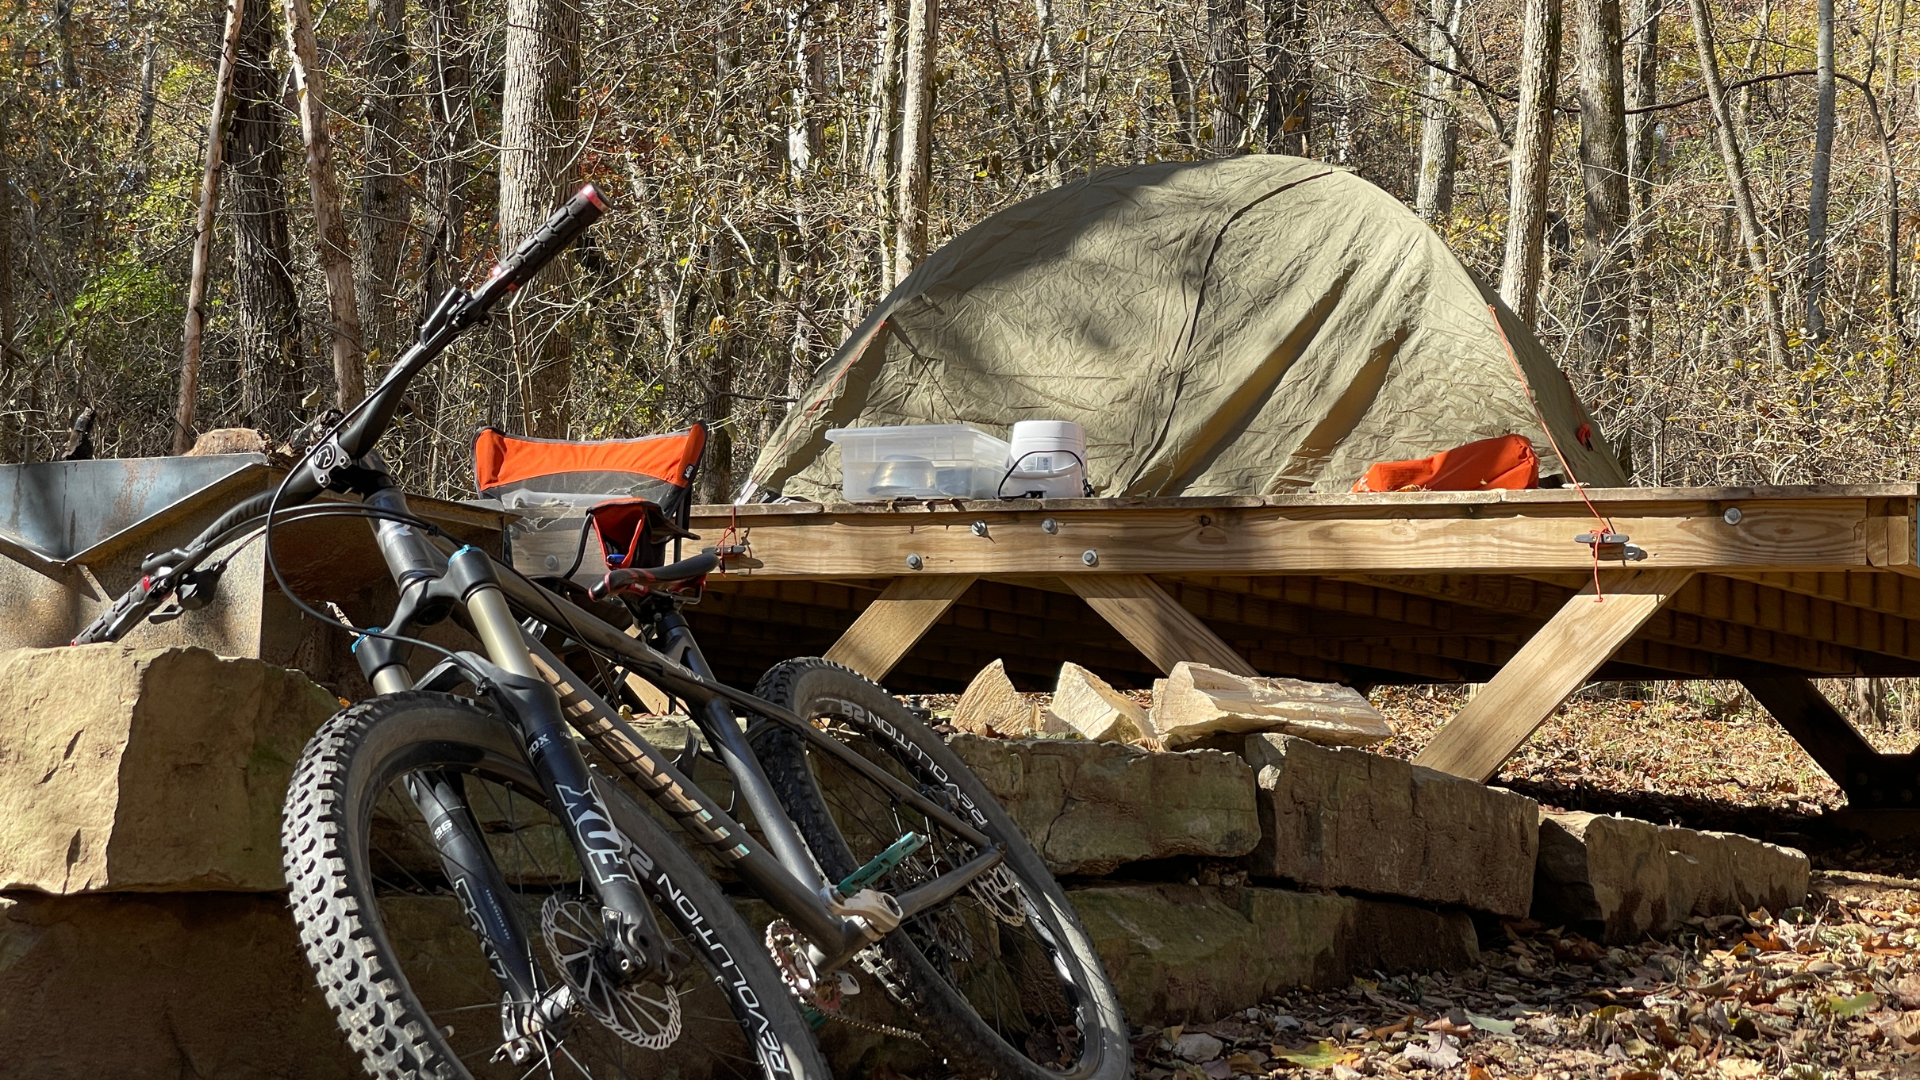 Camping tent on a wooden platform at Coler Mountain Bike Preserve. Mountain bike leaning in front.